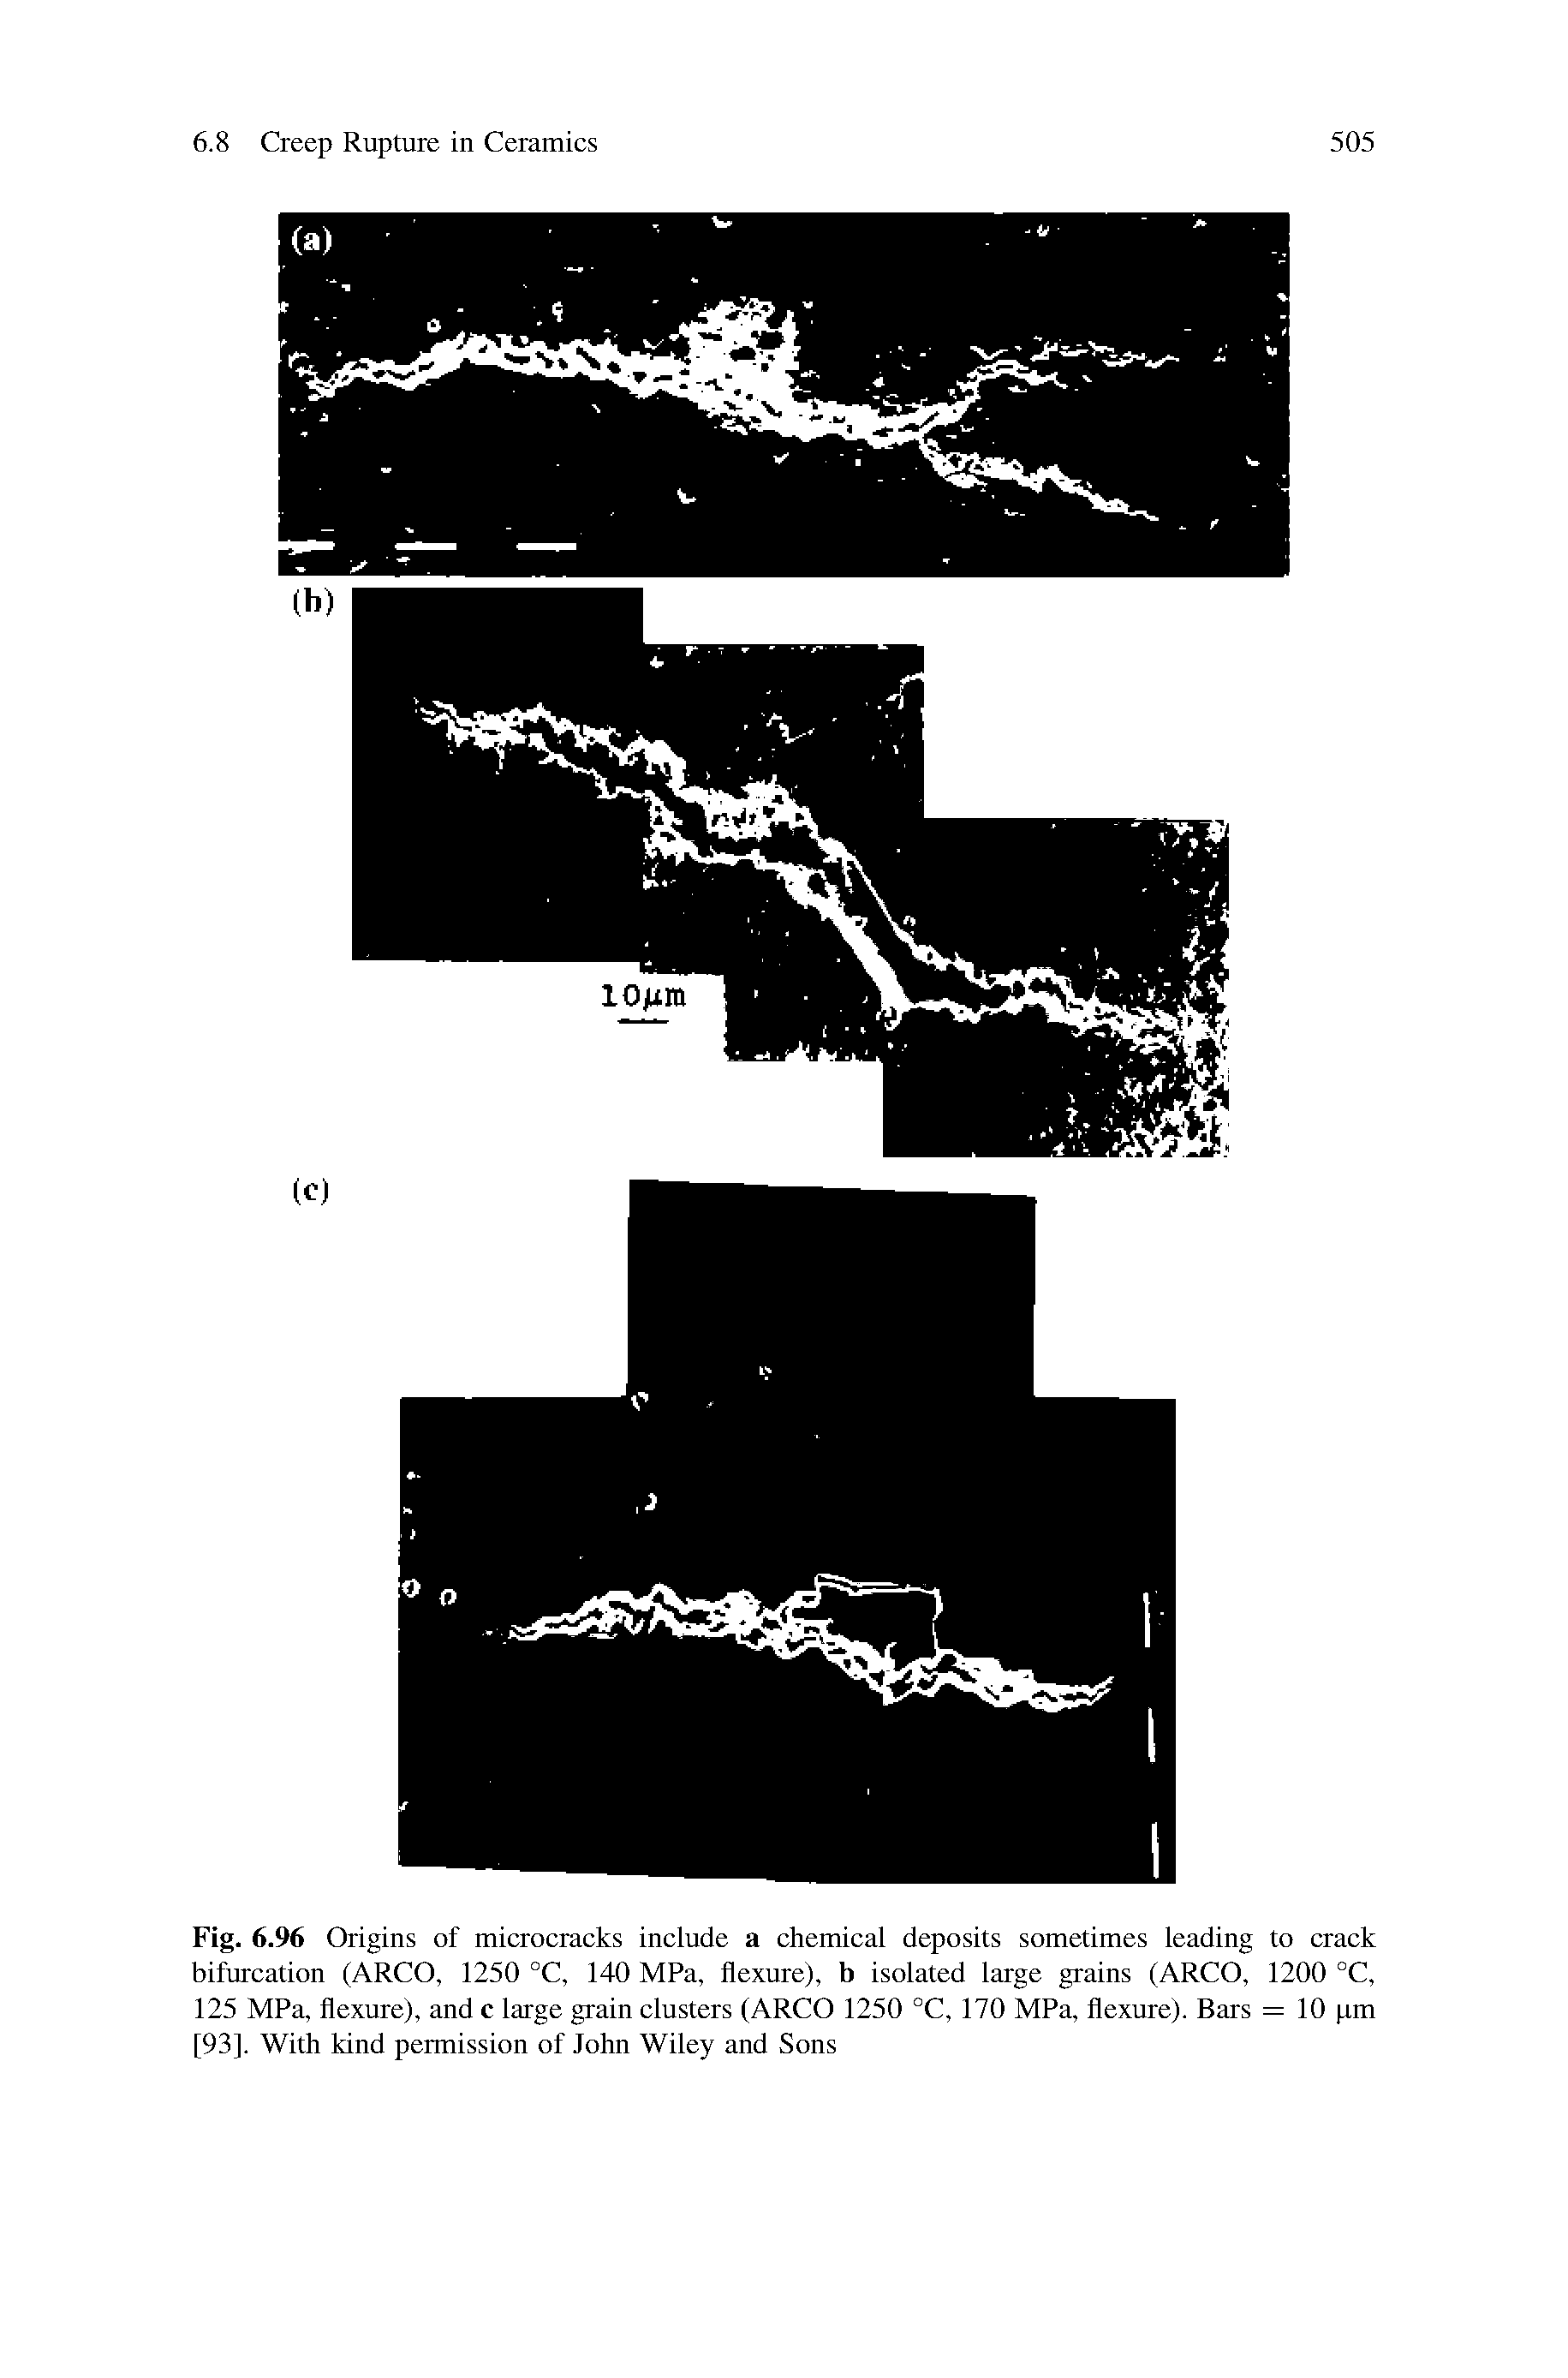 Fig. 6.96 Origins of microcracks include a chemical deposits sometimes leading to crack bifurcation (ARCO, 1250 °C, 140 MPa, flexure), b isolated large grains (ARCO, 1200 °C, 125 MPa, flexure), and c large grain clusters (ARCO 1250 °C, 170 MPa, flexure). Bars = 10 pm [93]. With kind permission of John Wiley and Sons...